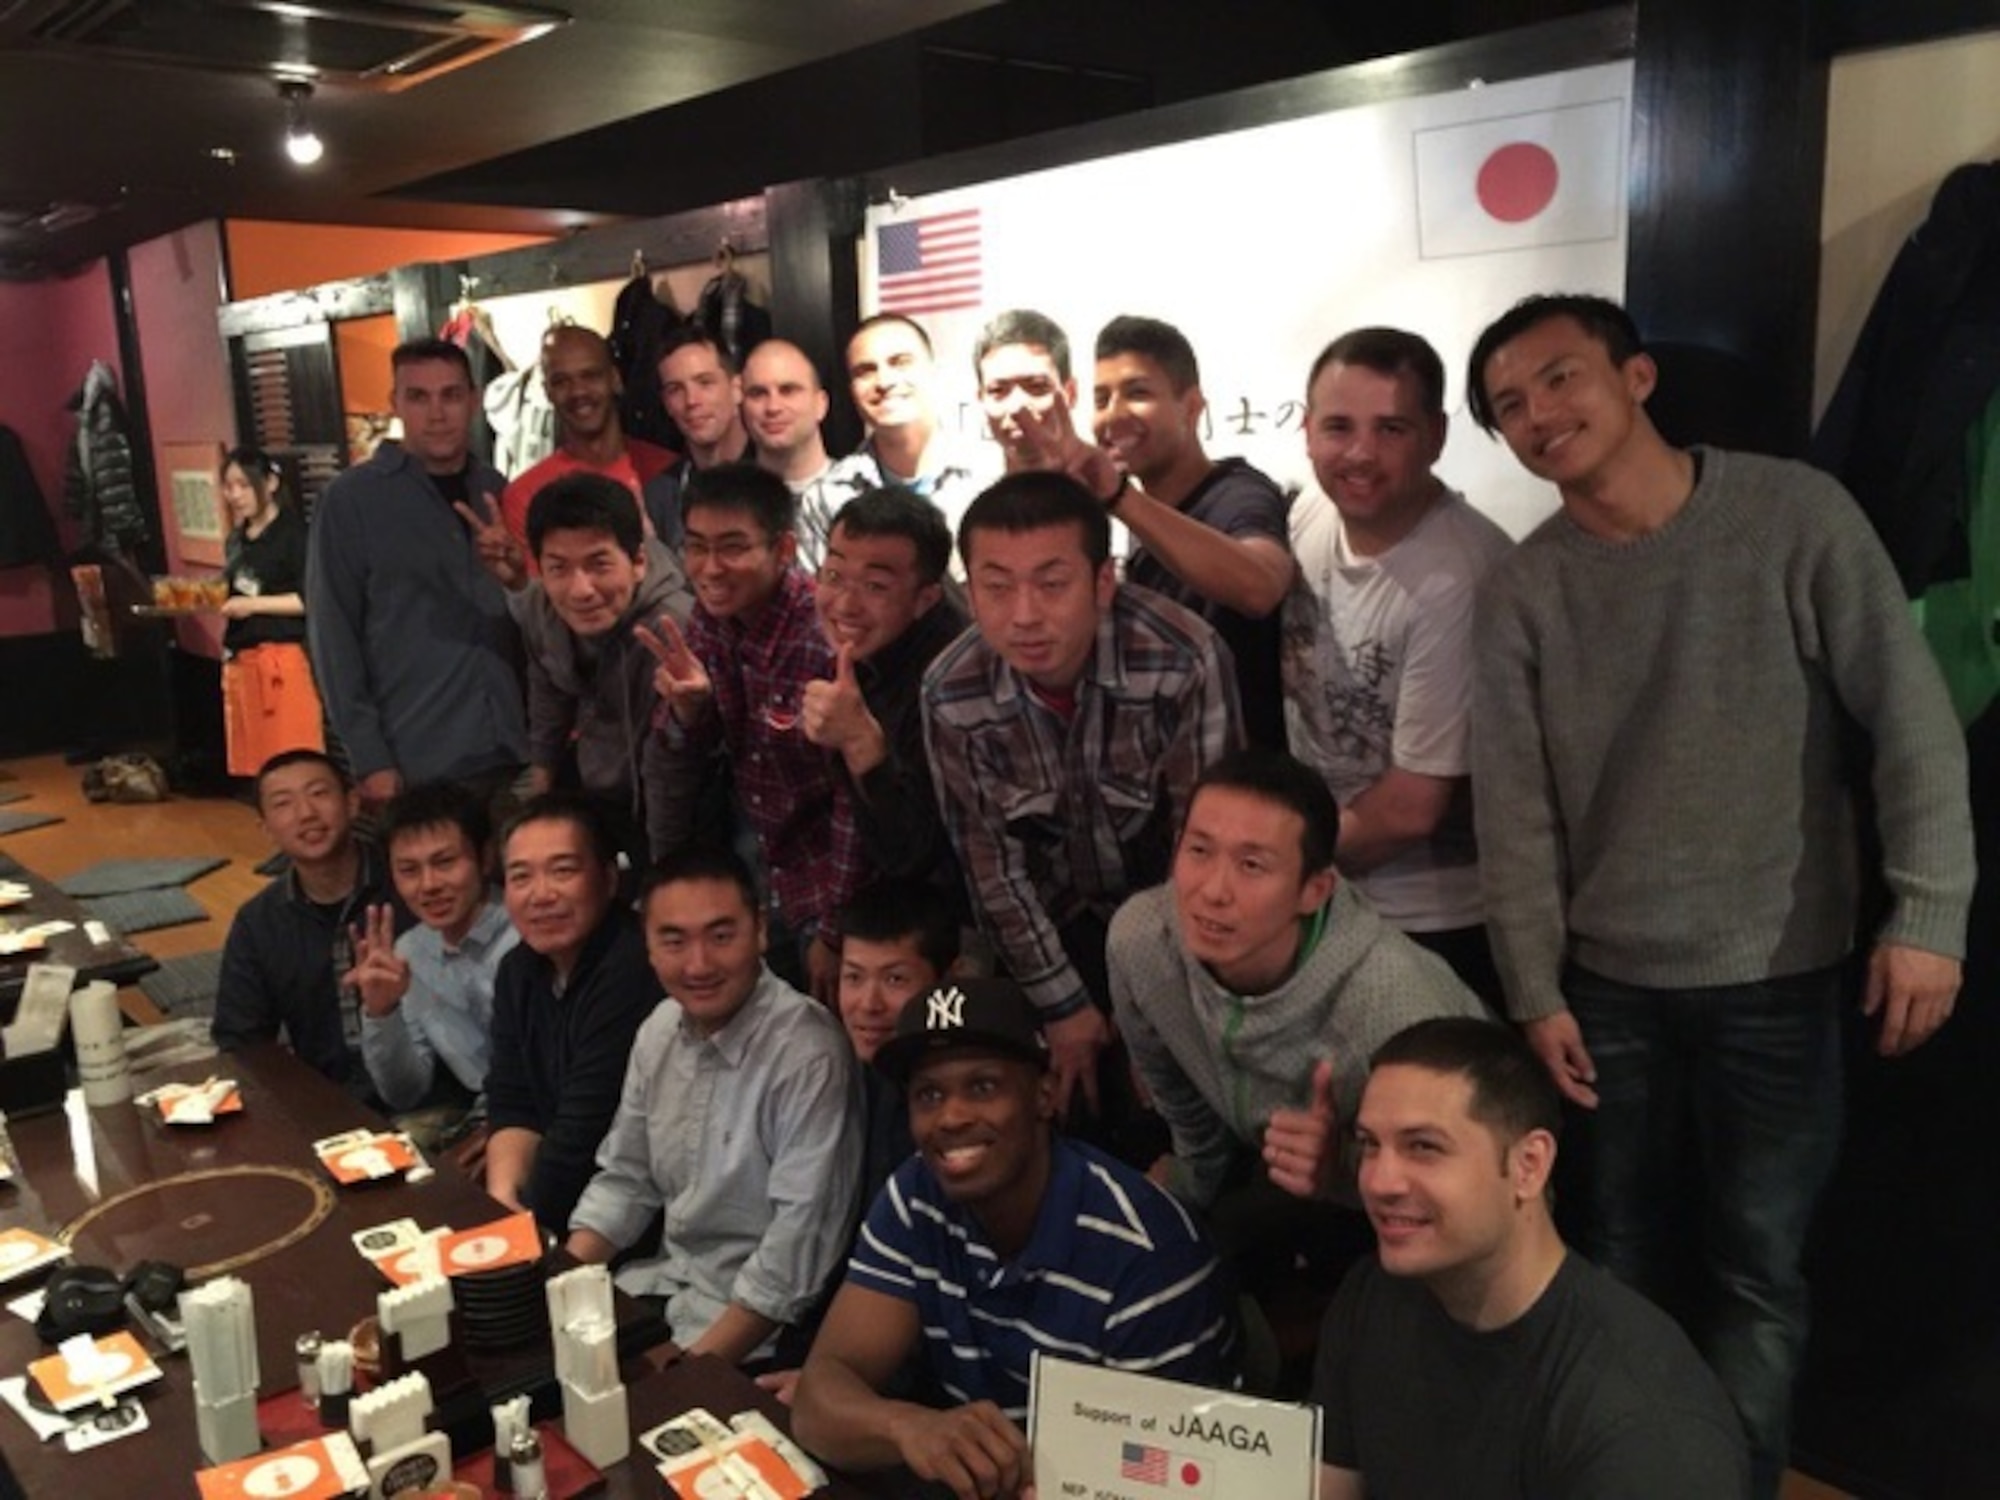 Yokota Airmen pose for a picture with Japan Air Self-Defense Force members at a restaurant during the noncommissioned officer exchange program at Komaki Air Base, Japan, March 23, 2015. Thirteen Airmen from Yokota stayed at Komaki Air Base for eight days and were able to experience the differences and similarities of U.S. and Japanese military life. (Courtesy photo)